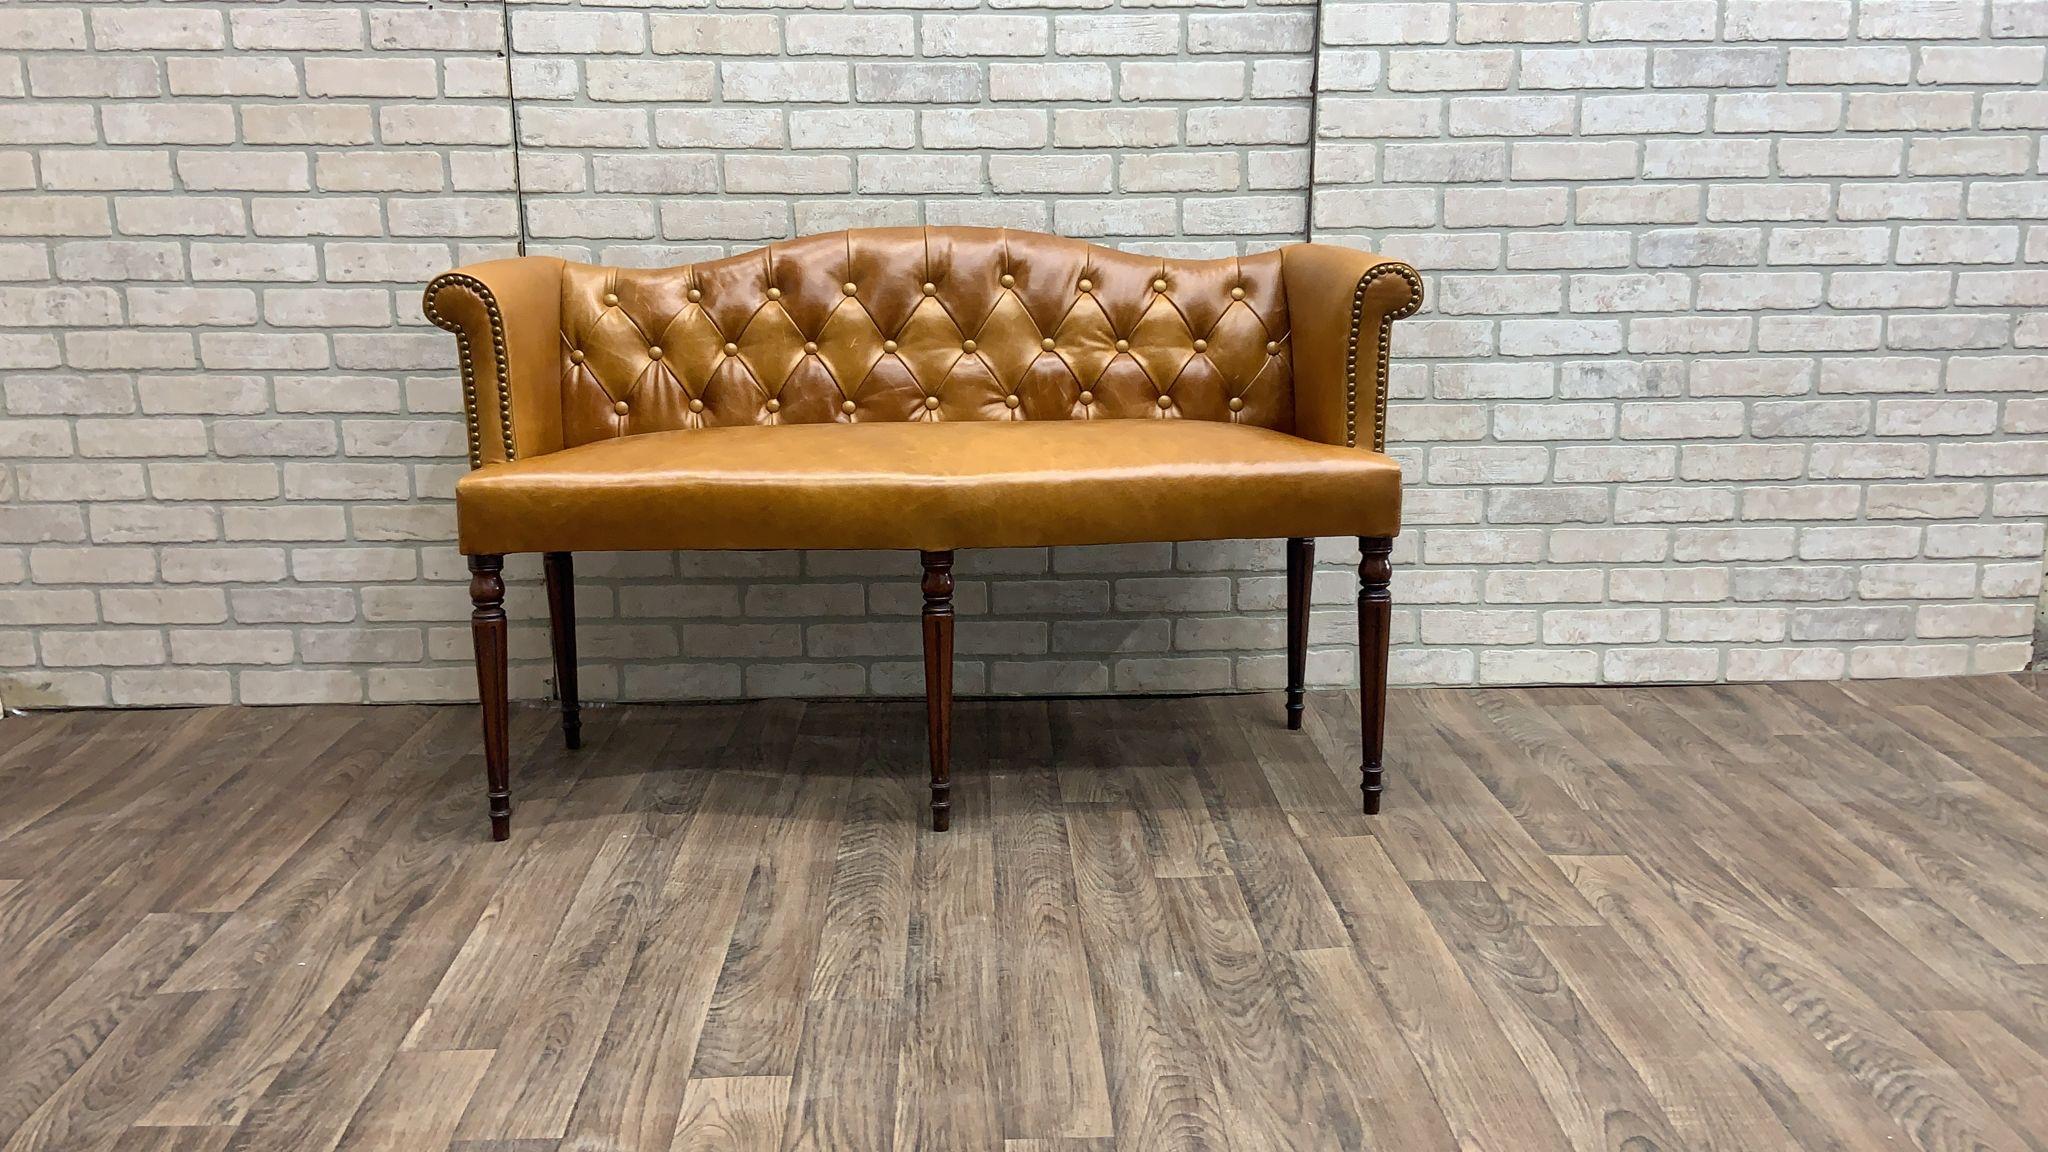 Antique British Colonial Settee Newly Upholstered in Cognac Leather

This handsome antique British Colonial 5-leg settee has been meticulously restored and newly upholstered in sumptuous “Cognac” full-grain Italian leather. Its classic and elegant